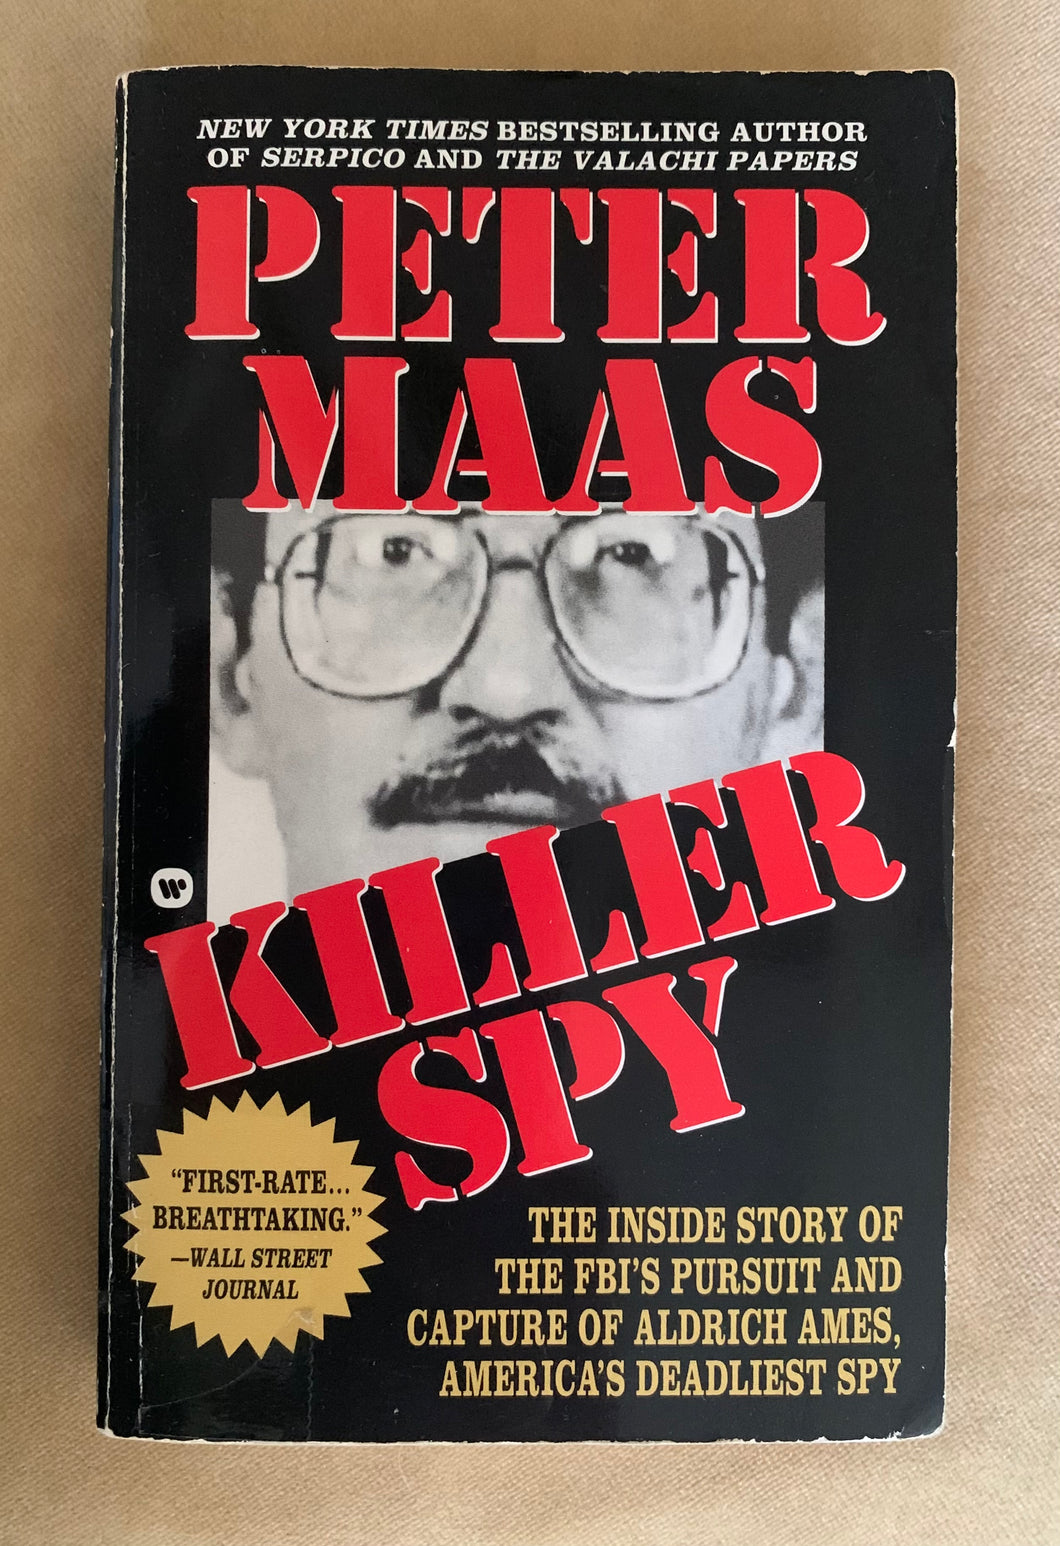 Killer Spy: The Inside Story Of The FBI's Pursuit And Capture Of Aldrich Ames, America's Deadliest Spy